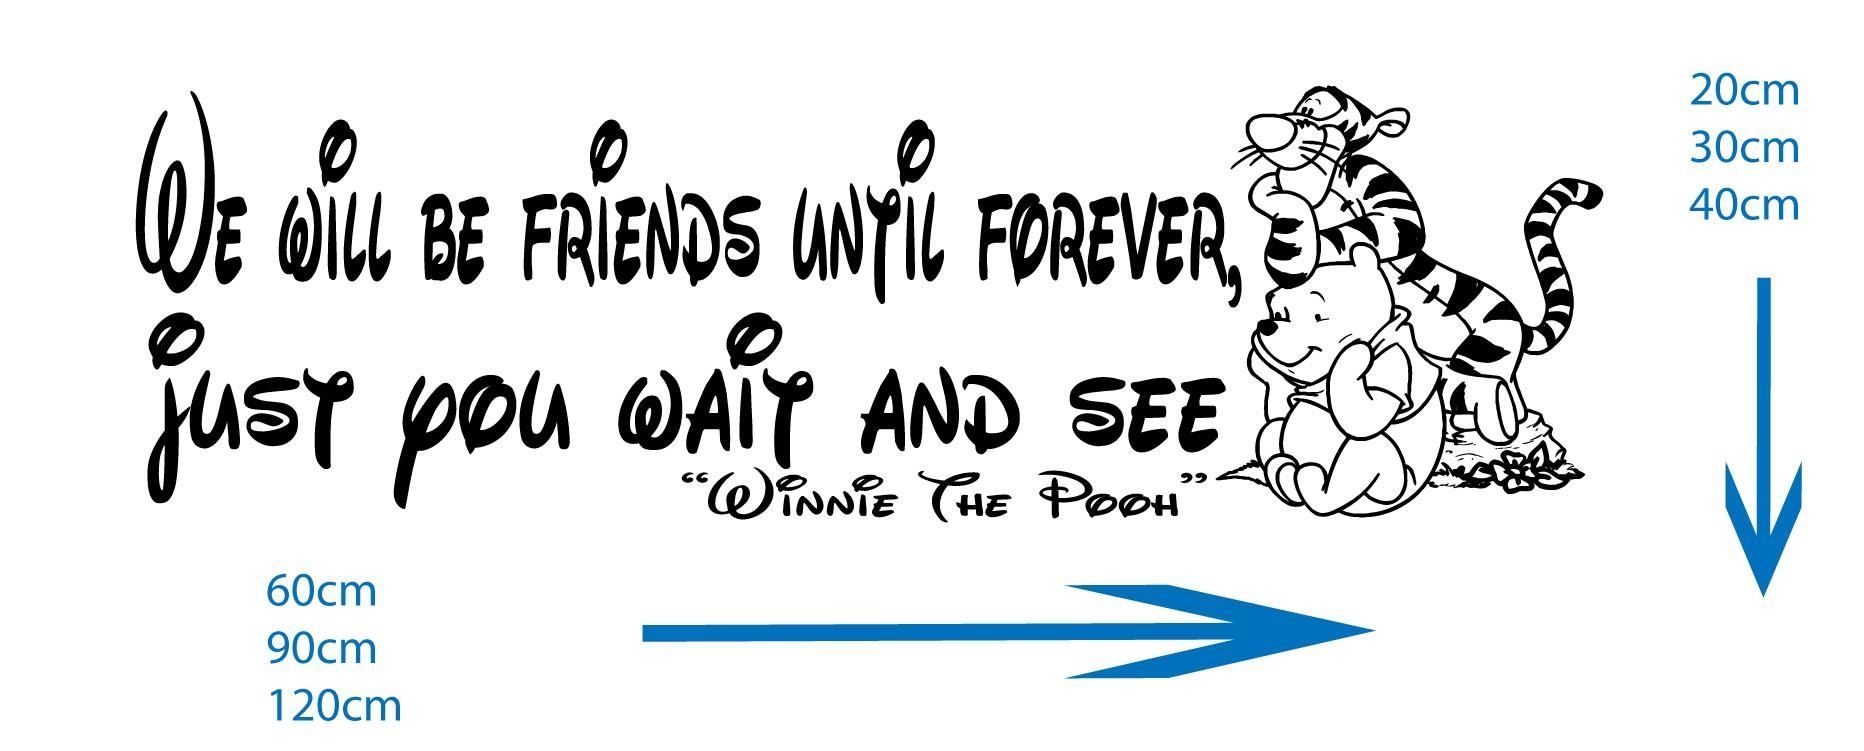 Winnie The Pooh – We Will Be Friends Forever, Just You Wait And Intended For Winnie The Pooh Vinyl Wall Art (View 18 of 20)